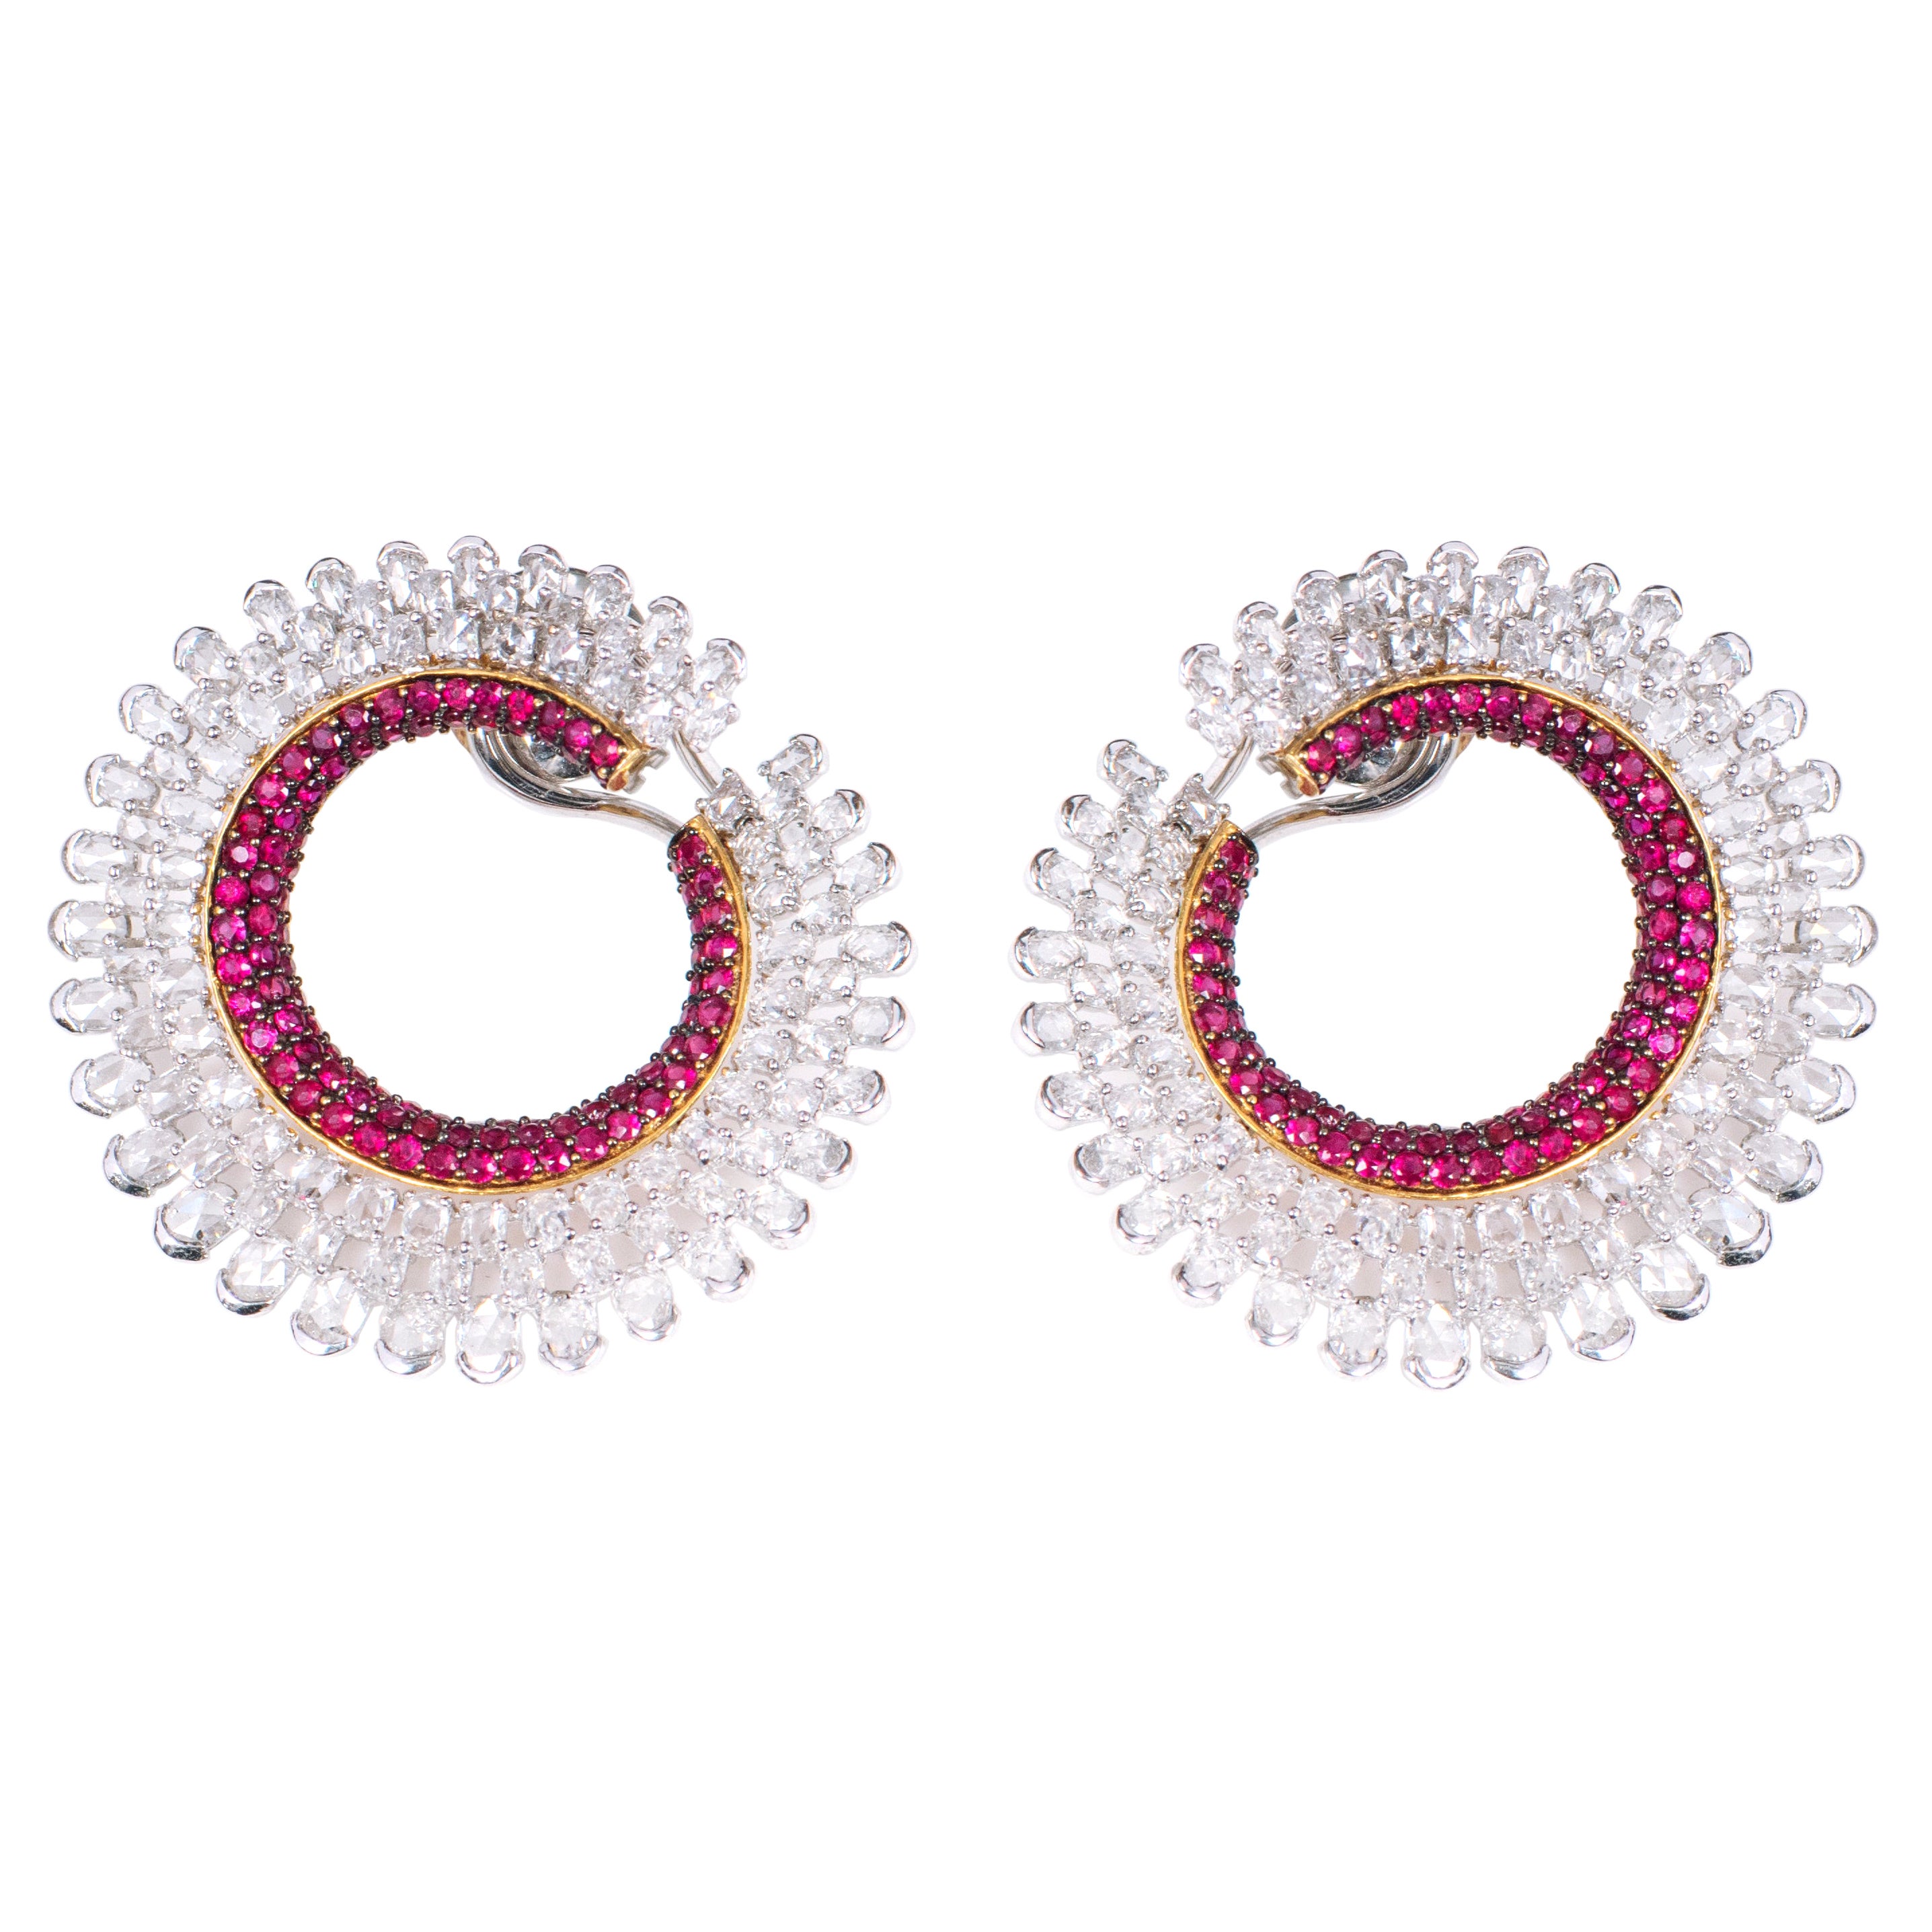 18 Karat White Gold 8.11 Carat Diamond and Ruby Cocktail Stud Hoop Earrings For Sale